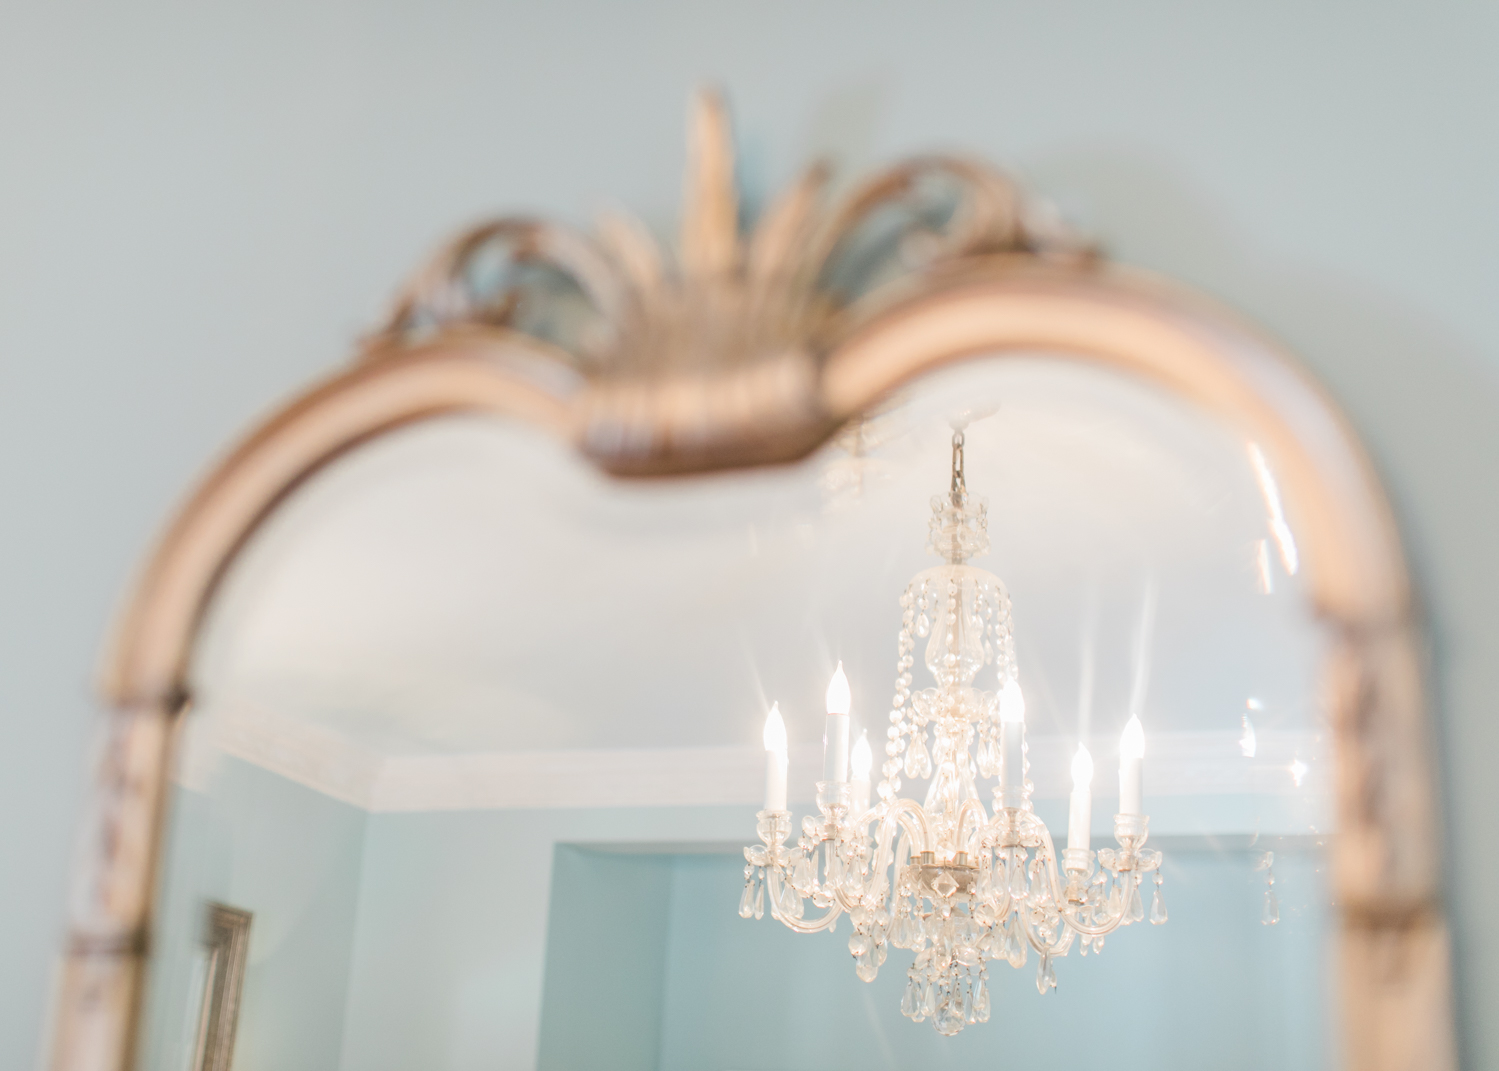 Legare Waring House Wedding Photography | Charleston Wedding Photographer | Charleston Film Photographer | Molly Carr Photography | The Petal Report | Plantation House in South Carolina | Antique Gold Chandelier with Gold Mirror